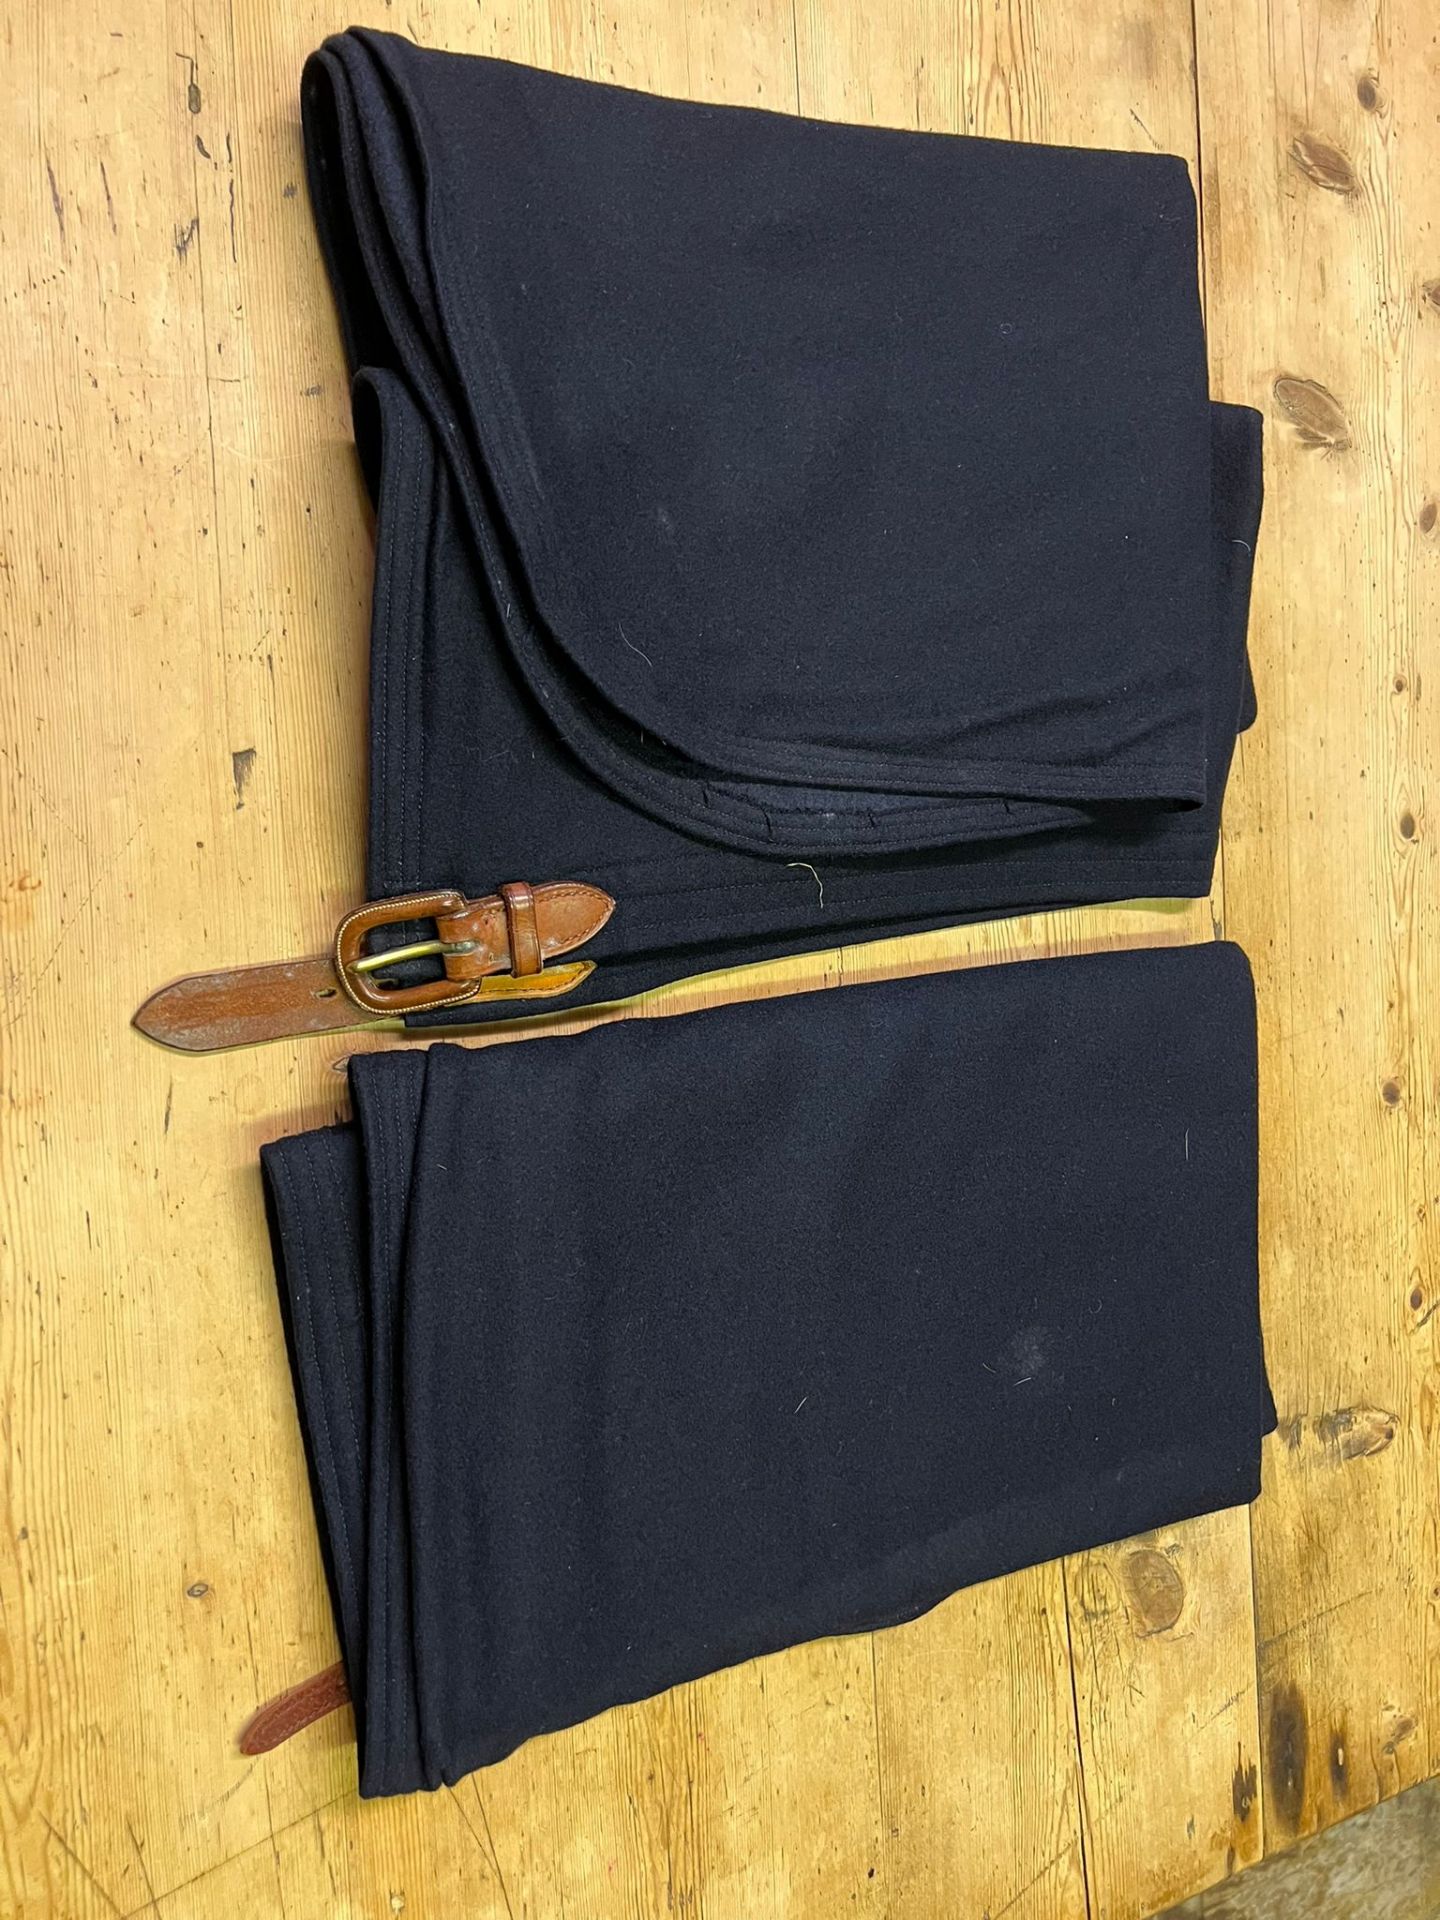 Pair of dark blue Melton cloth aprons, one with an antique leather covered buckle